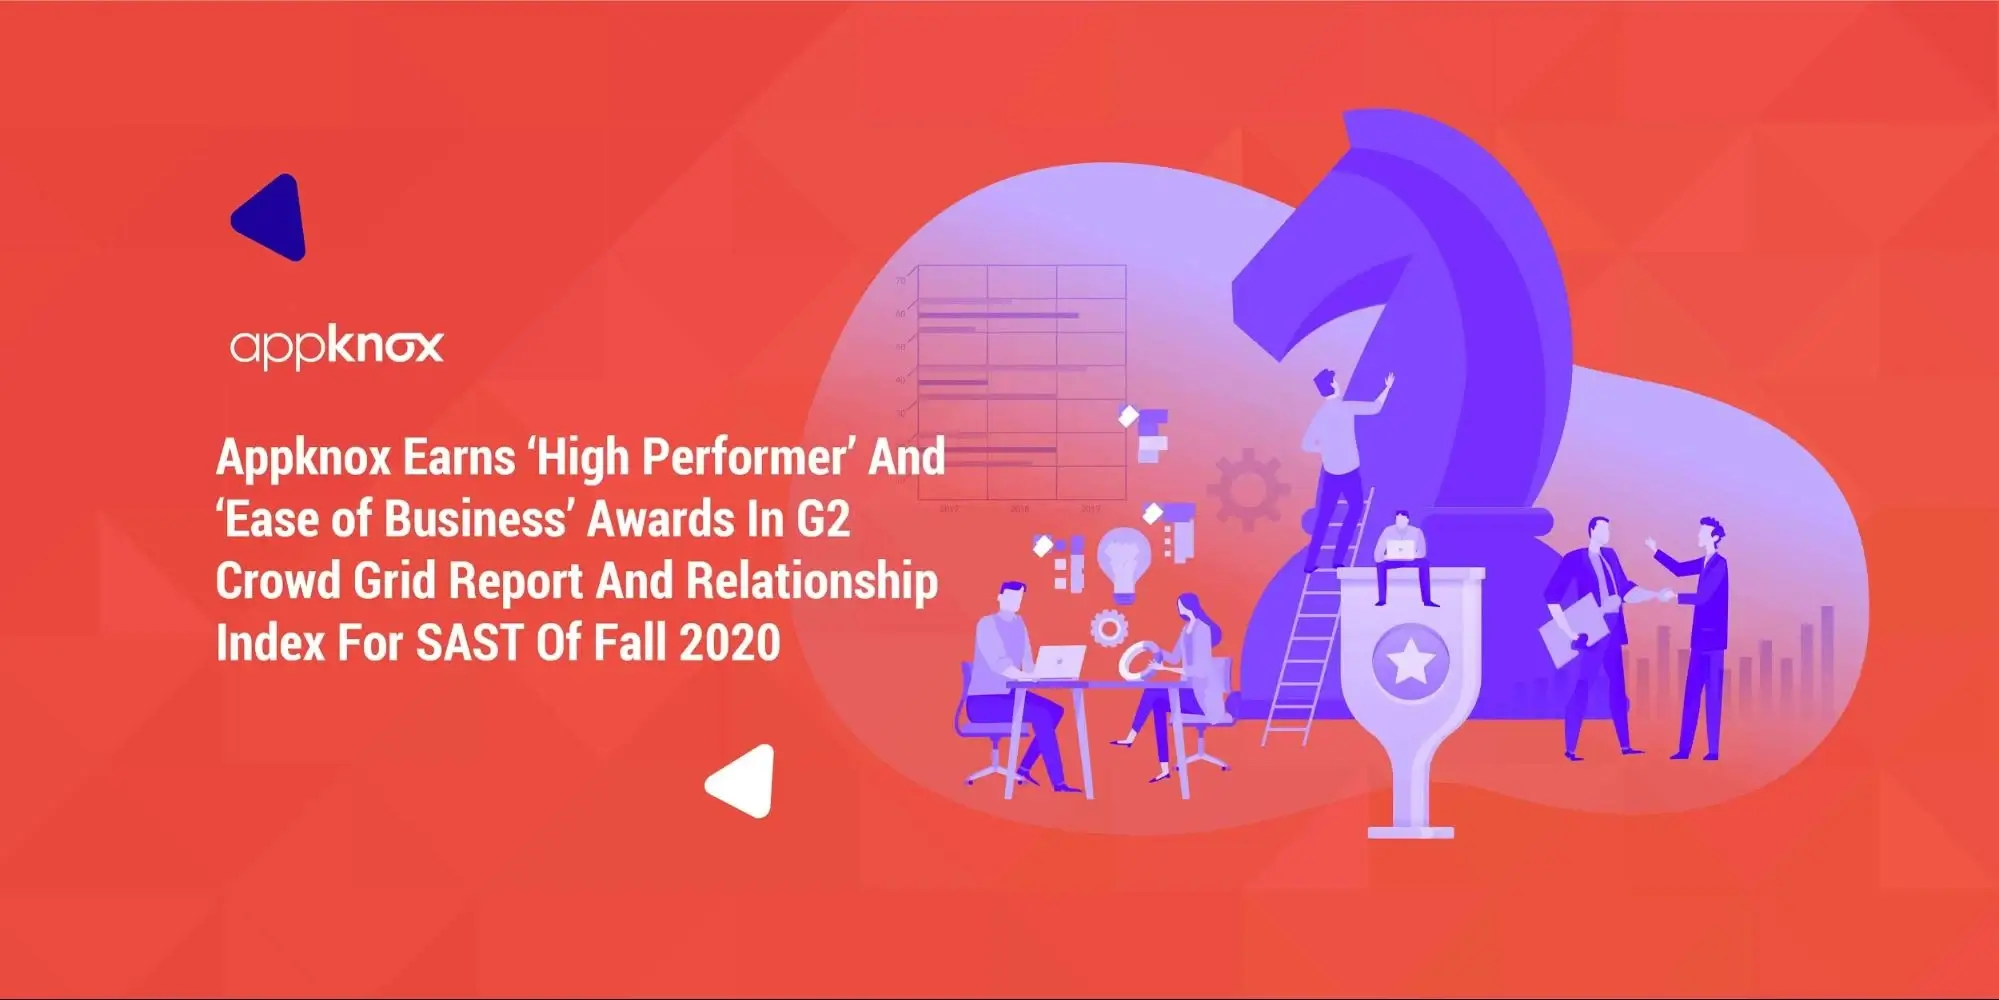 Appknox Earns ‘High Performer’ And ‘Ease of Business’ Awards In G2 Crowd Grid Report And Relationship Index For SAST Of Fall 2020